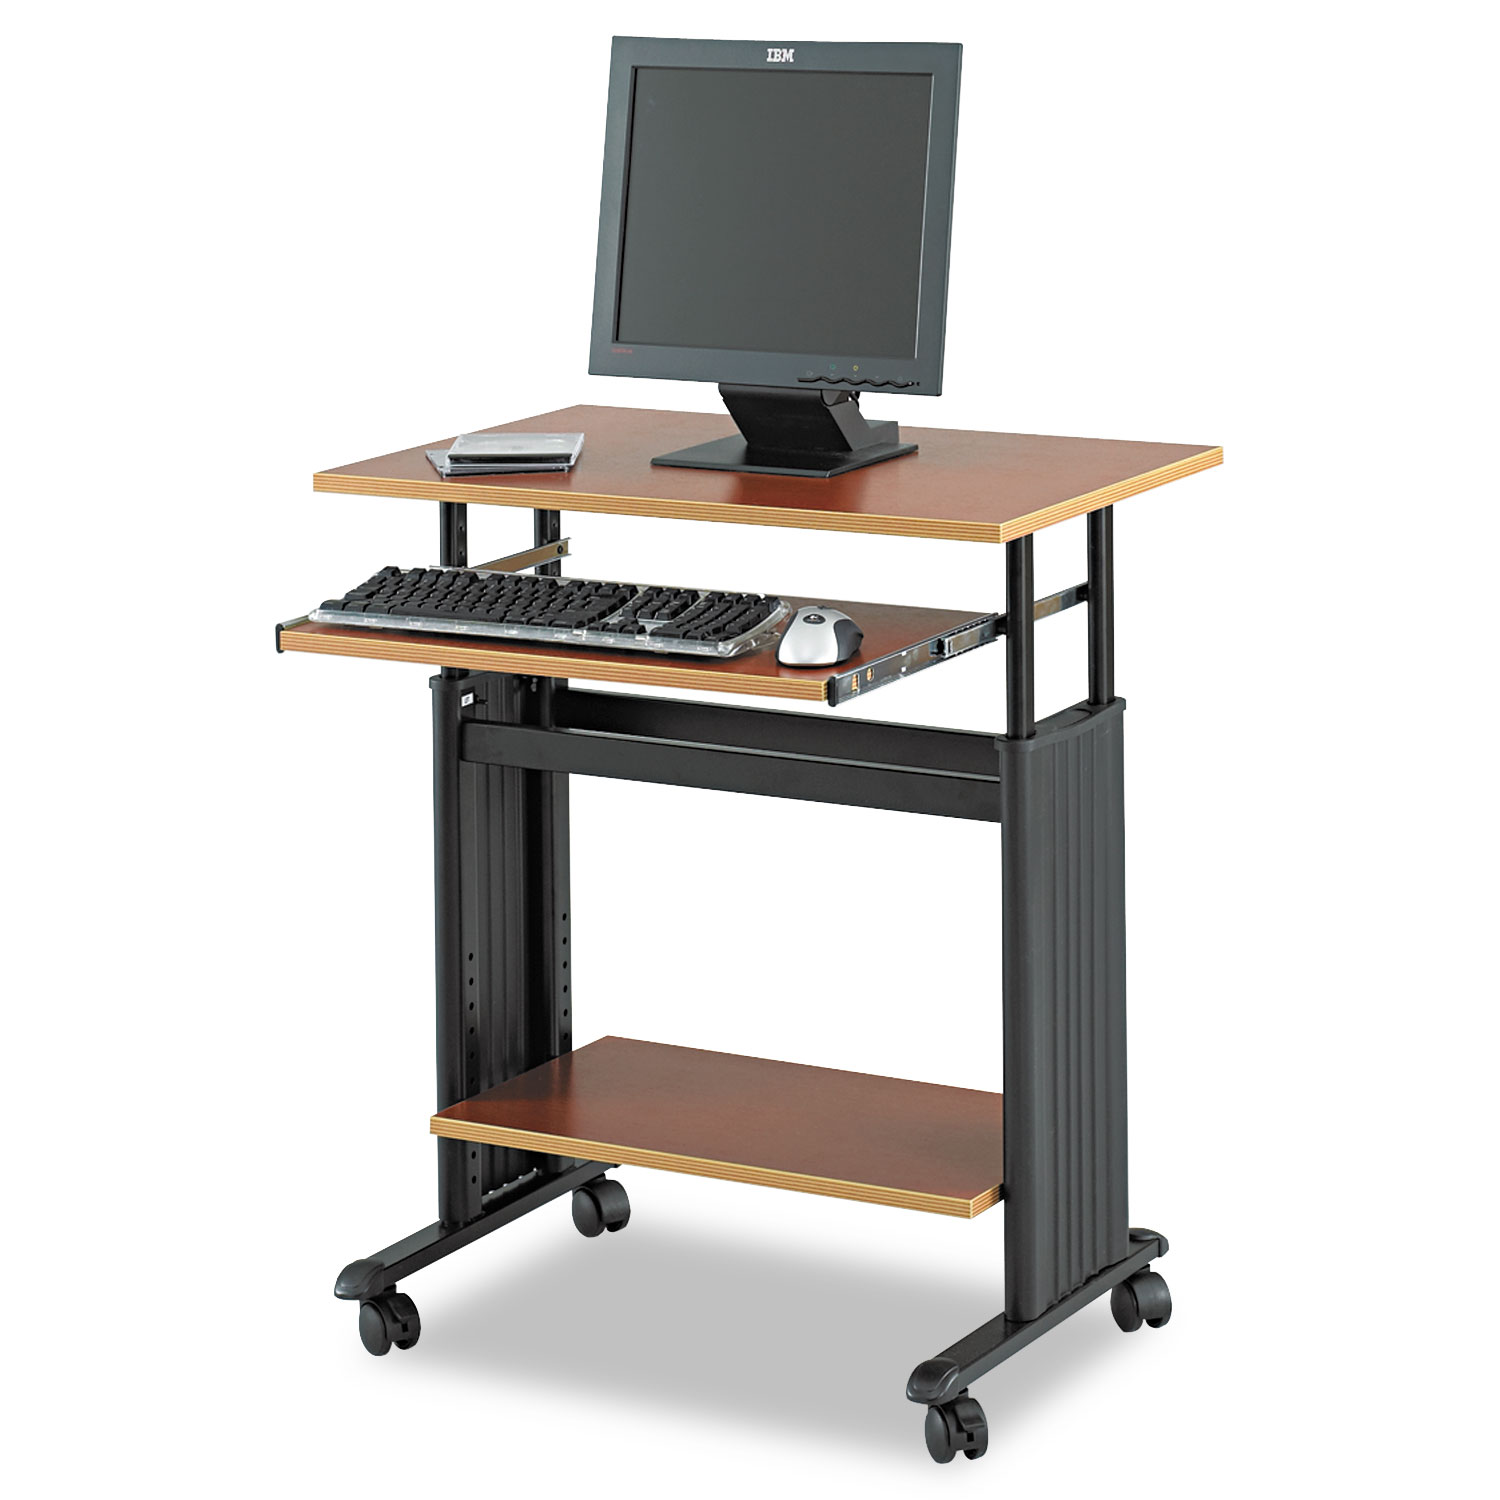  Safco 1925CY Adjustable Height Workstation, 29.5w x 22d x 34h, Cherry/Black (SAF1925CY) 